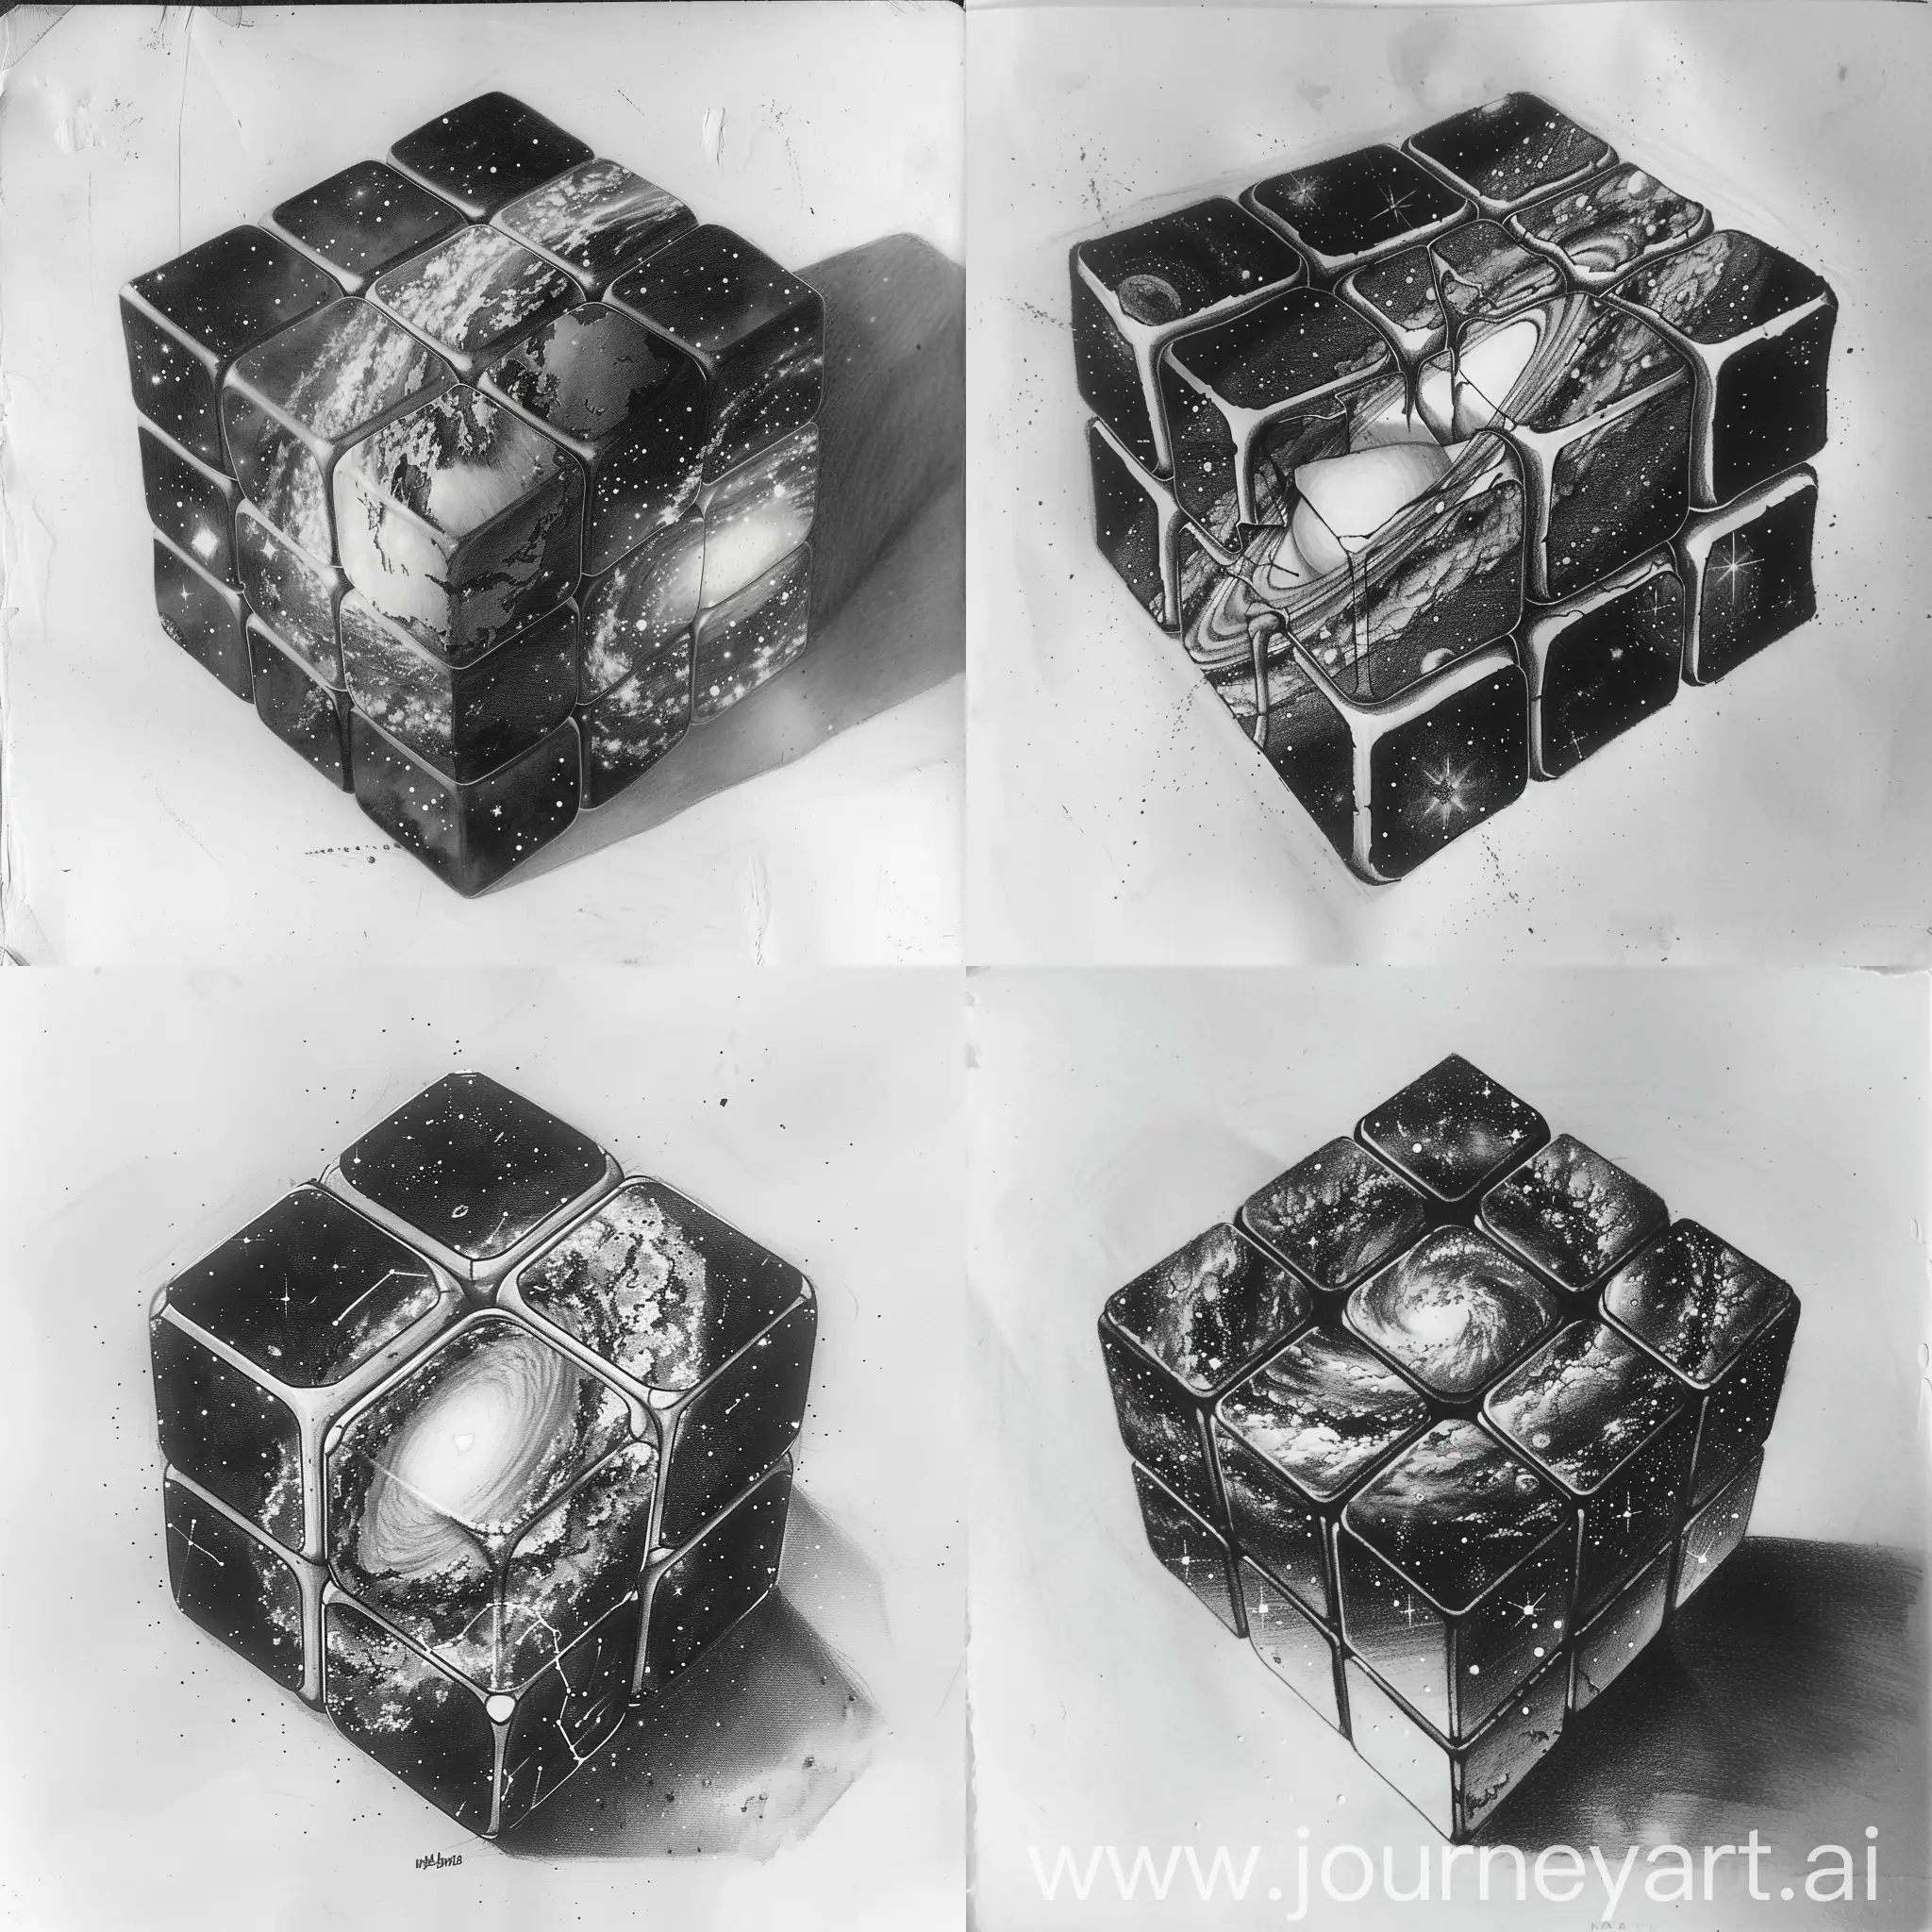 pencil drawing, black and white, galaxy, space system in the form of a Rubik's cube